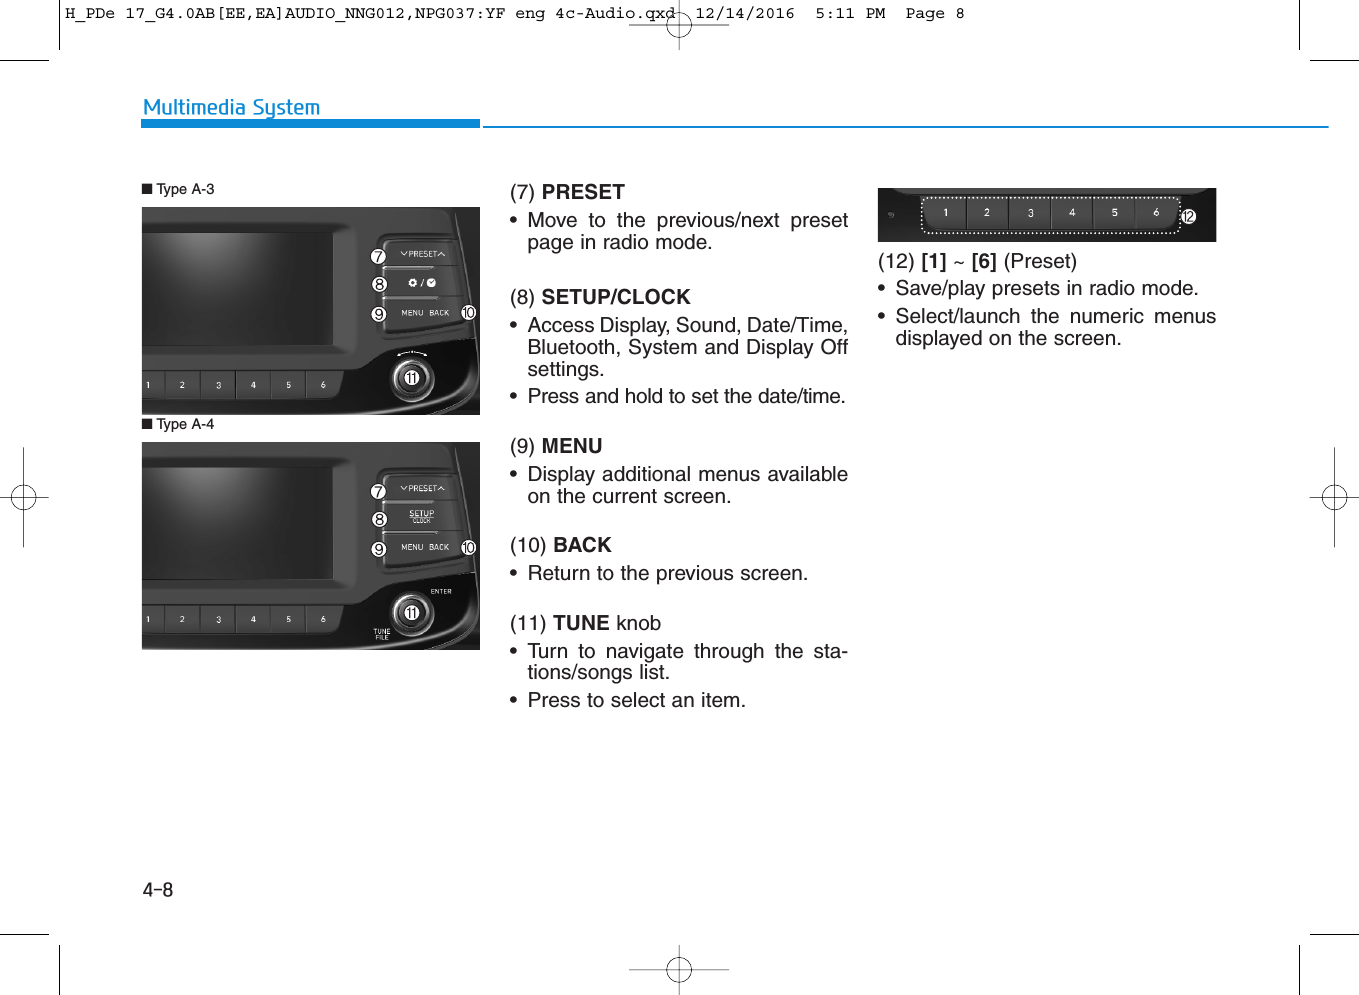 (7) PRESET• Move to the previous/next presetpage in radio mode.(8) SETUP/CLOCK• Access Display, Sound, Date/Time,Bluetooth, System and Display Offsettings.• Press and hold to set the date/time.(9) MENU• Display additional menus availableon the current screen.(10) BACK• Return to the previous screen.(11) TUNE knob • Turn to navigate through the sta-tions/songs list.• Press to select an item.(12) [1] ~ [6] (Preset)• Save/play presets in radio mode.• Select/launch the numeric menusdisplayed on the screen.■Type A-4■Type A-34-8Multimedia SystemH_PDe 17_G4.0AB[EE,EA]AUDIO_NNG012,NPG037:YF eng 4c-Audio.qxd  12/14/2016  5:11 PM  Page 8